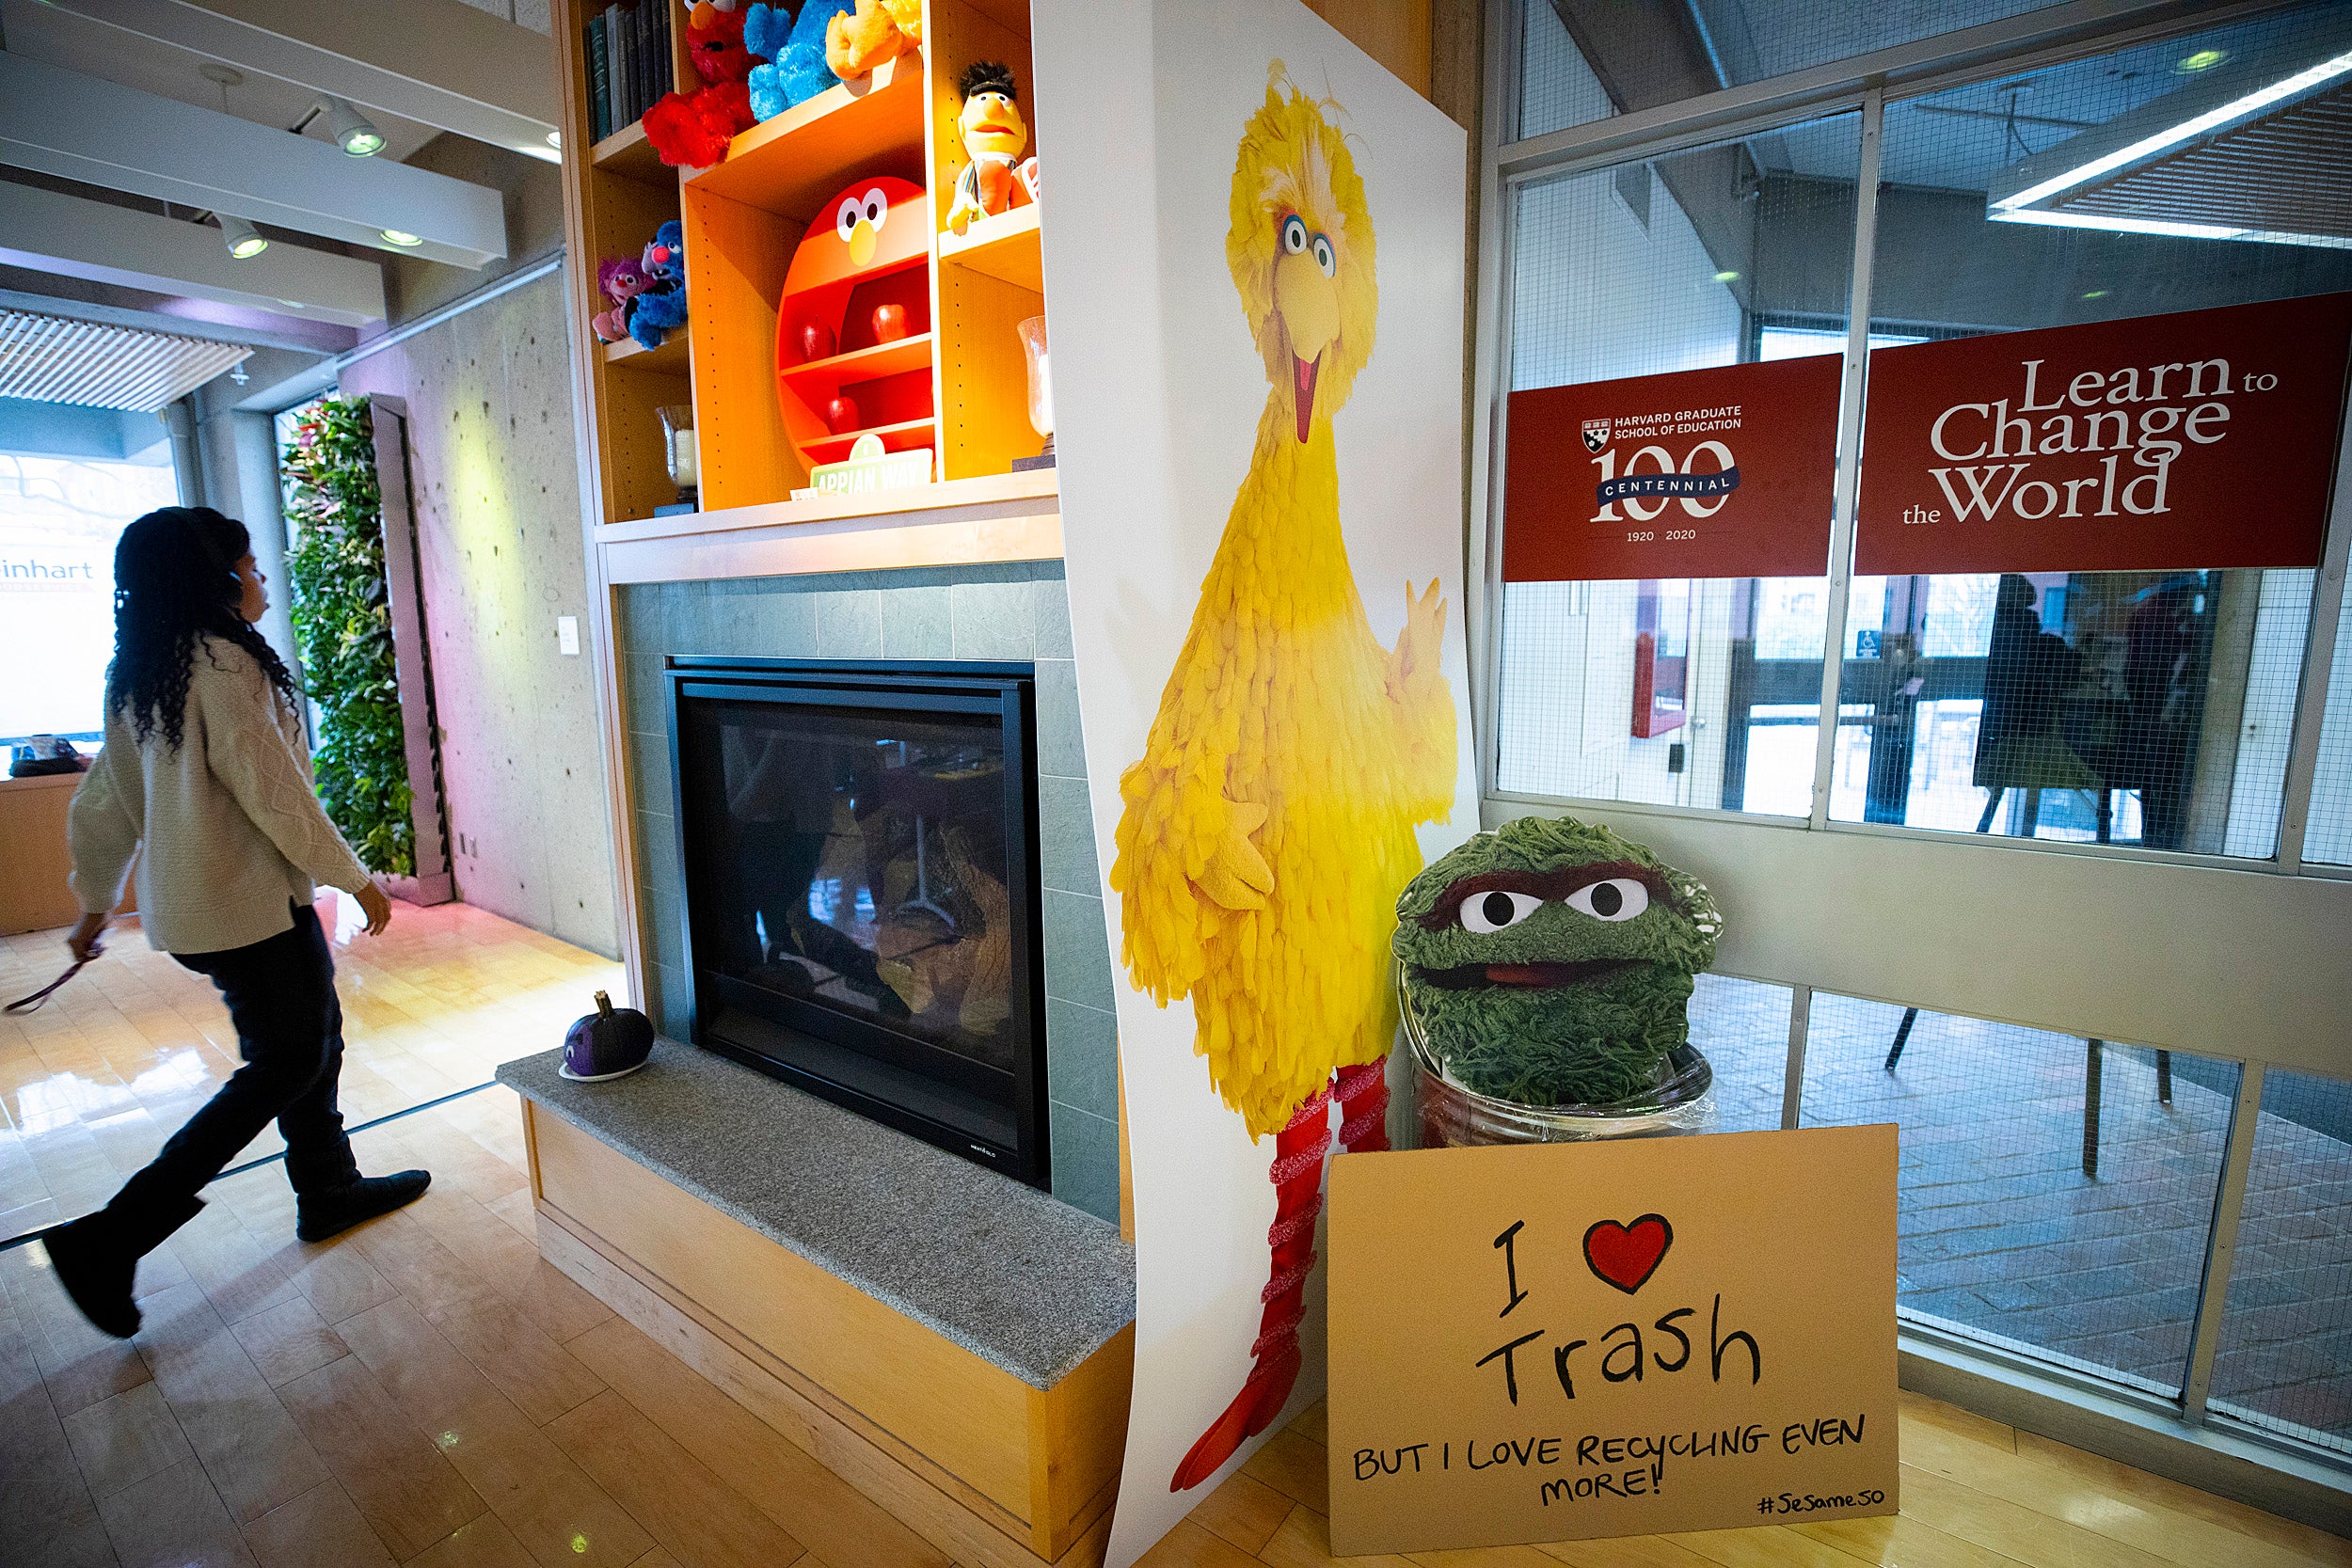 Shelving over a fireplace at the Ed School is lined with Sesame Street toys.